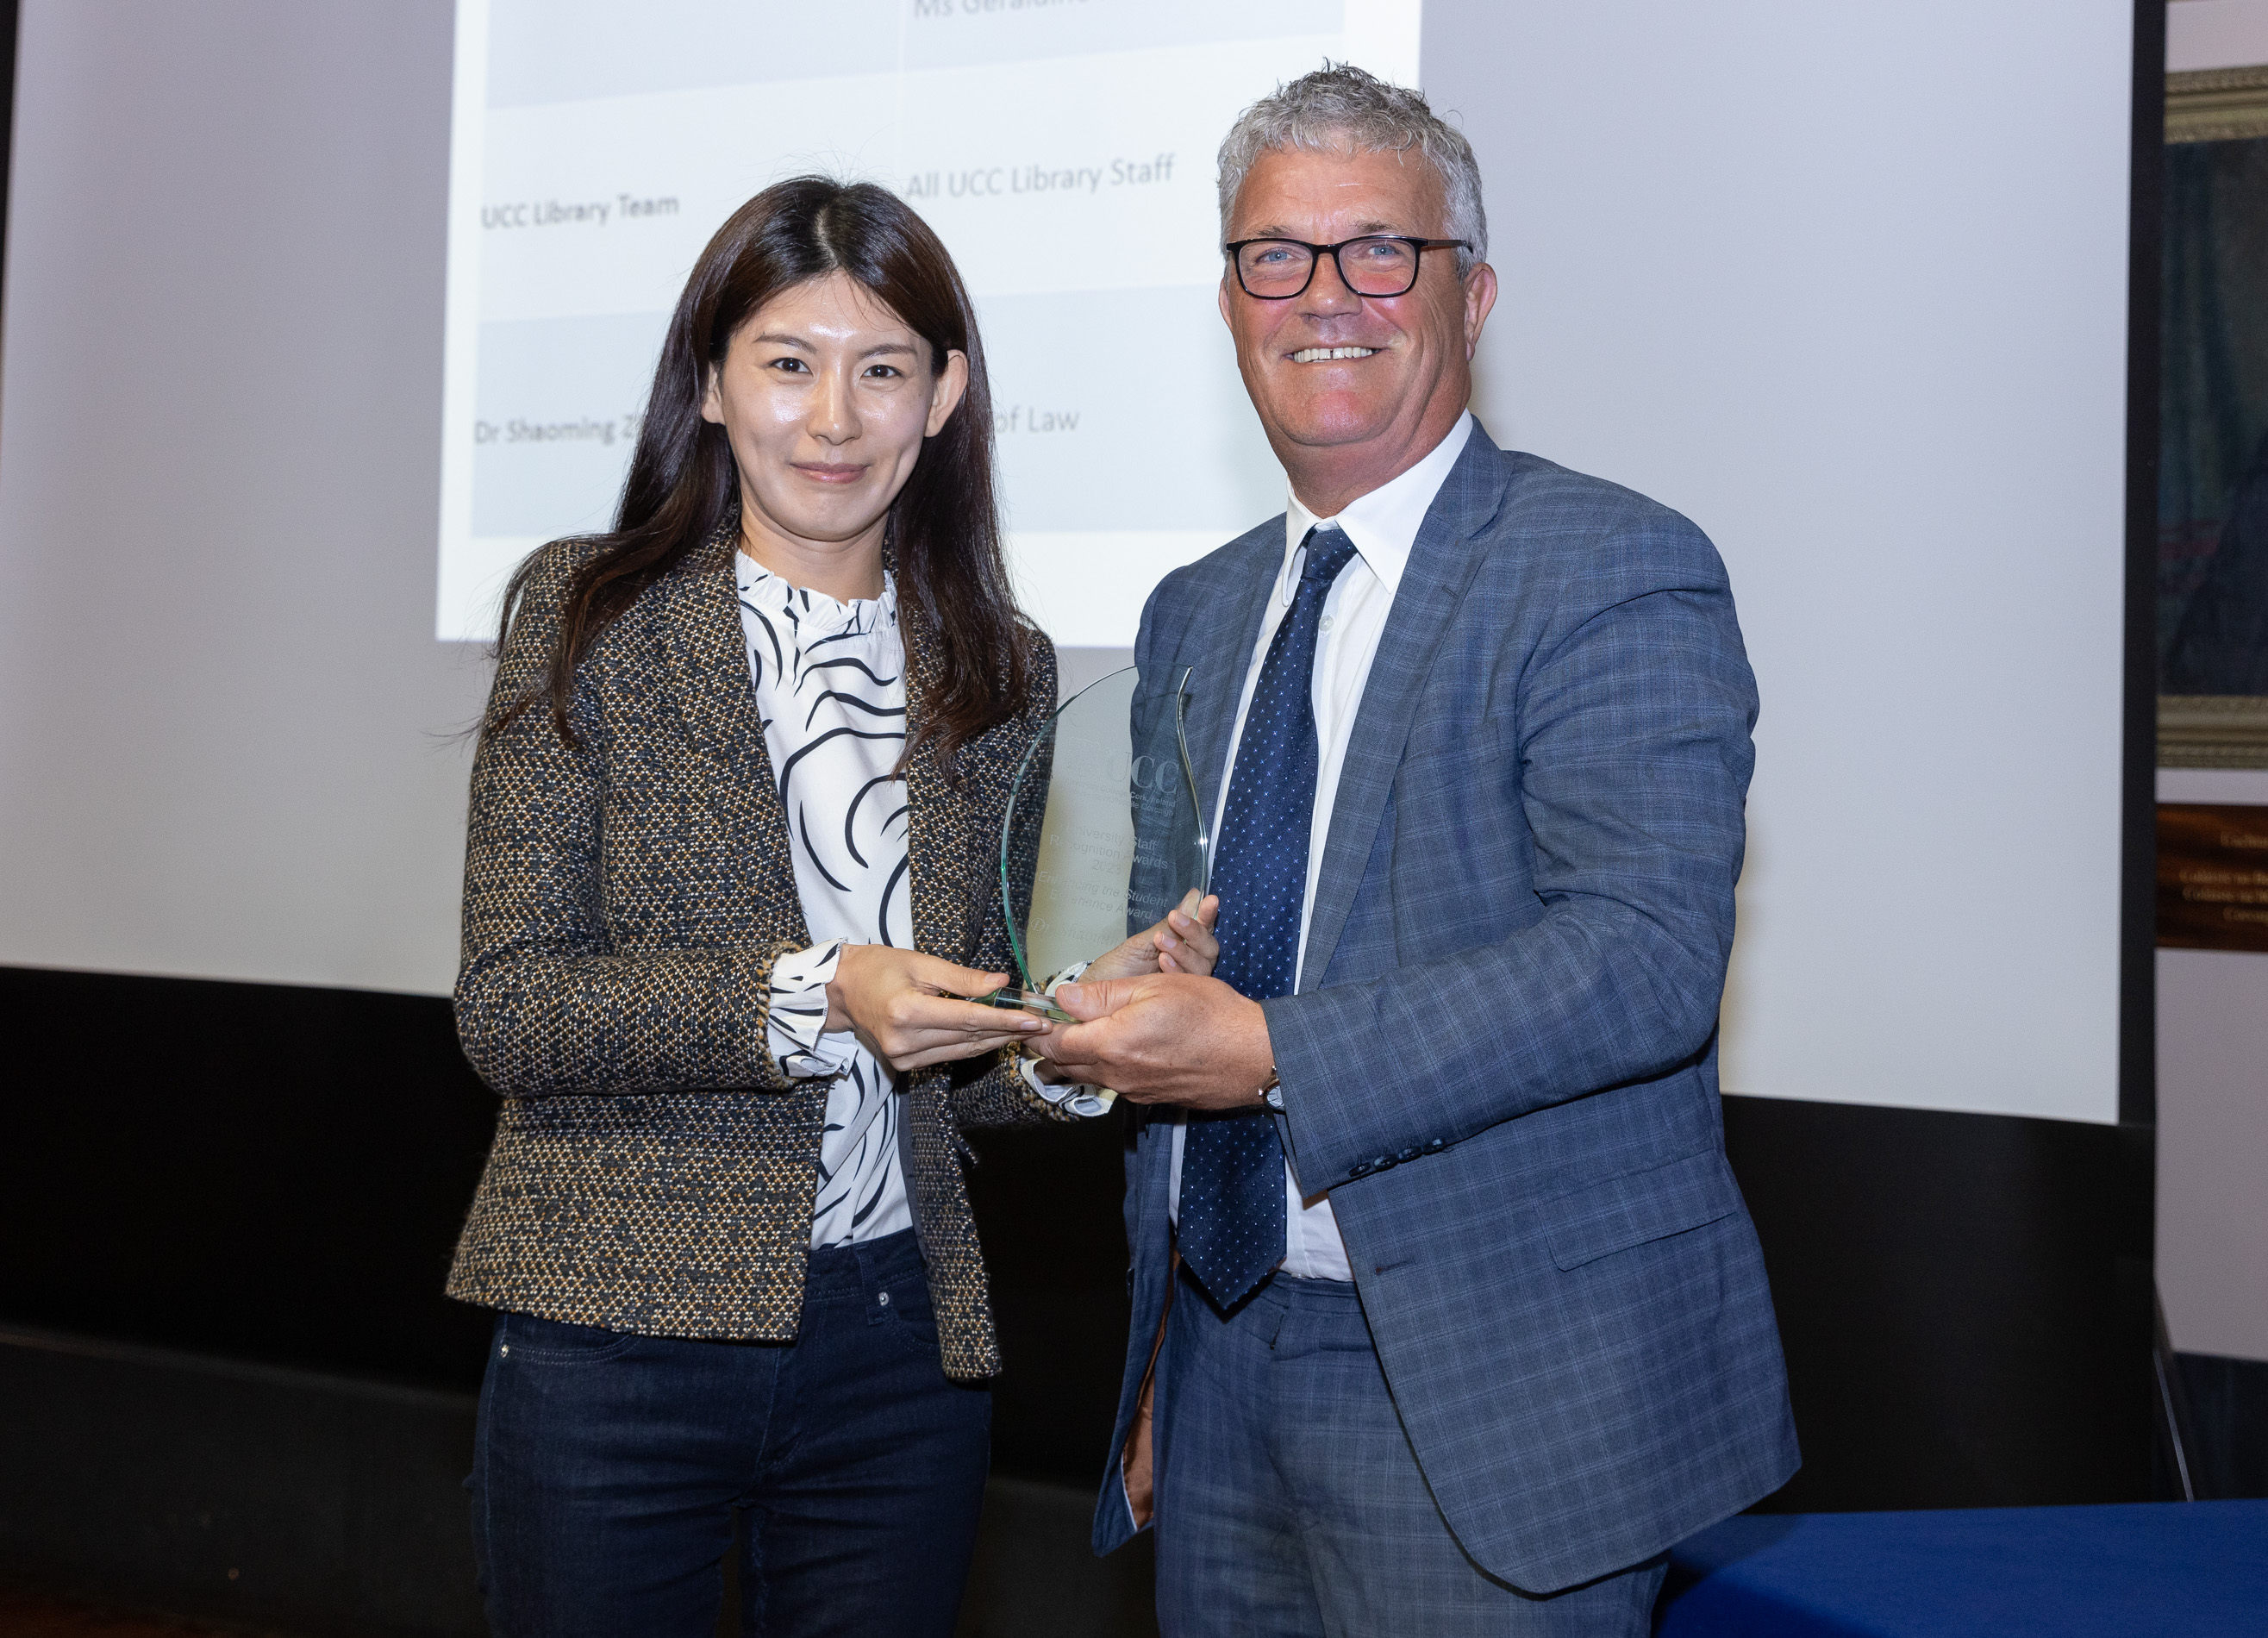 UCC School of Law celebrates Dr Shaoming Zhu's success at the University Staff Recognition Awards
